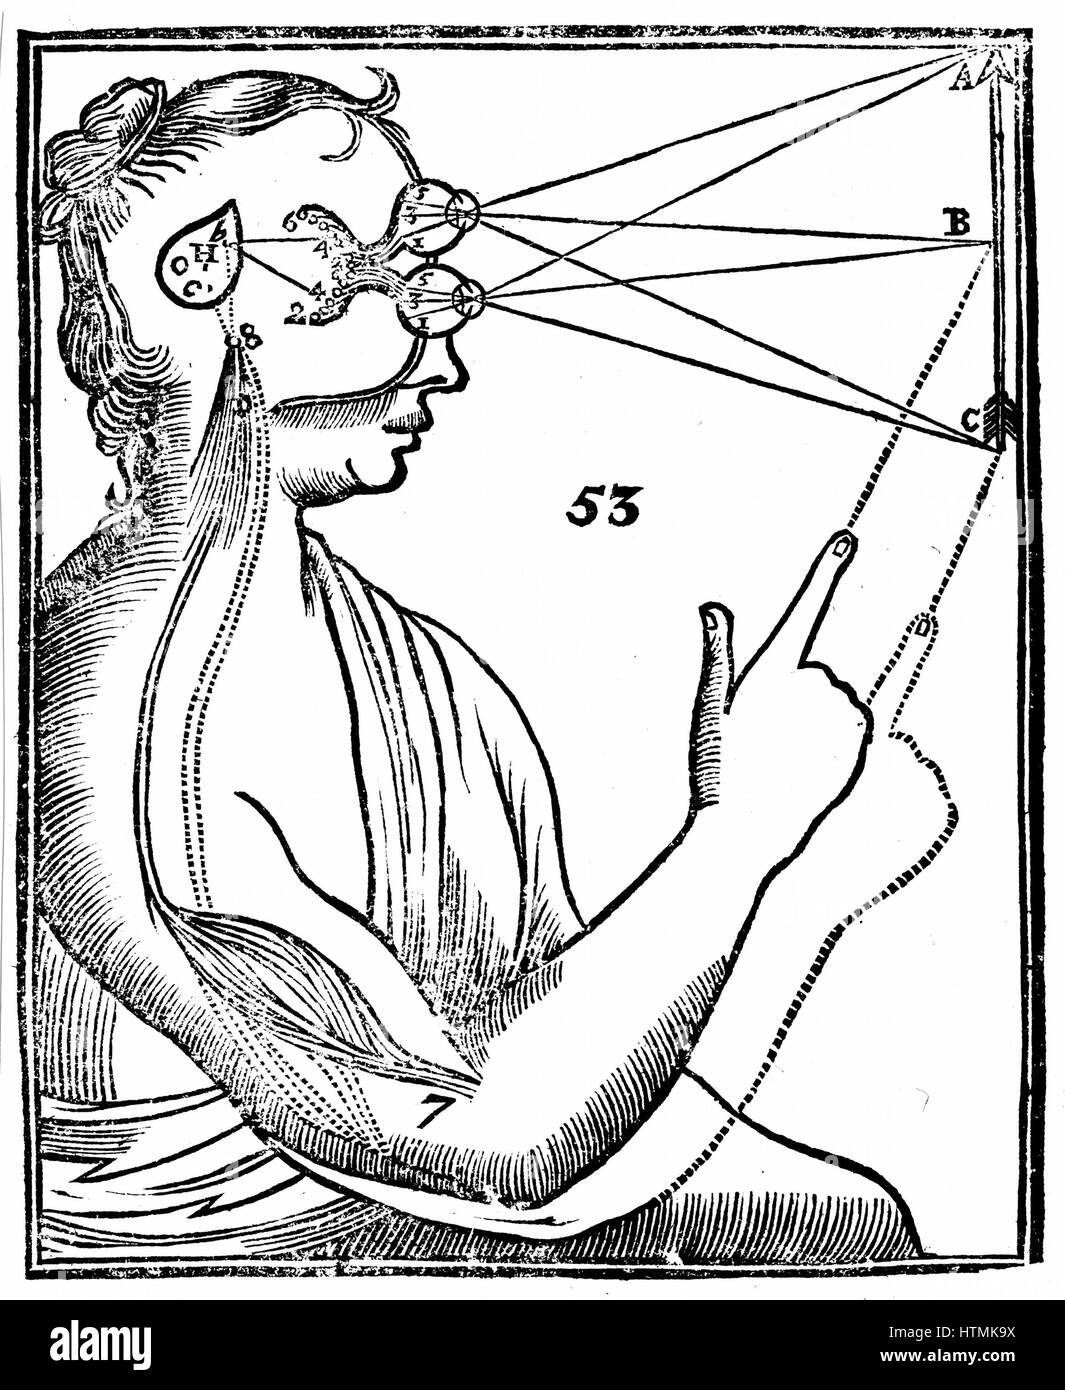 Descartes' idea of vision, showing passage of nervous impulse from the eye to the pineal gland and so to the muscles. From Rene Descartes' 'Opera Philosophica', 1692 (Tractatus de homine). Woodcut Stock Photo